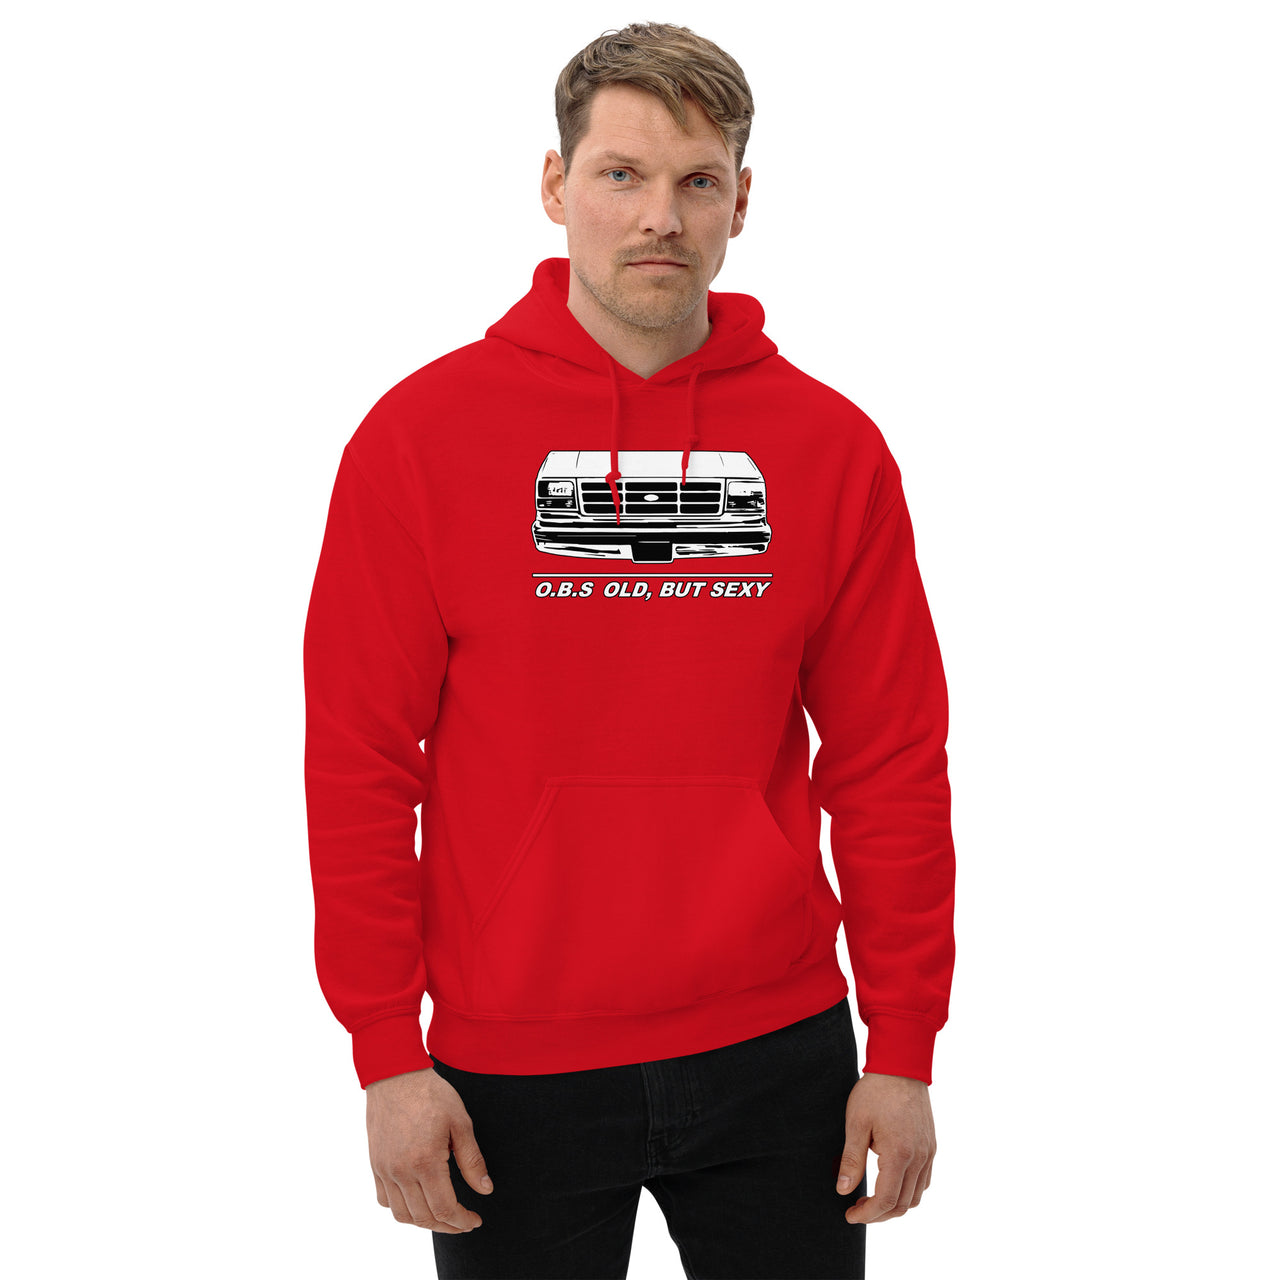 OBS Truck - Old, But Sexy Hoodie modeled in red